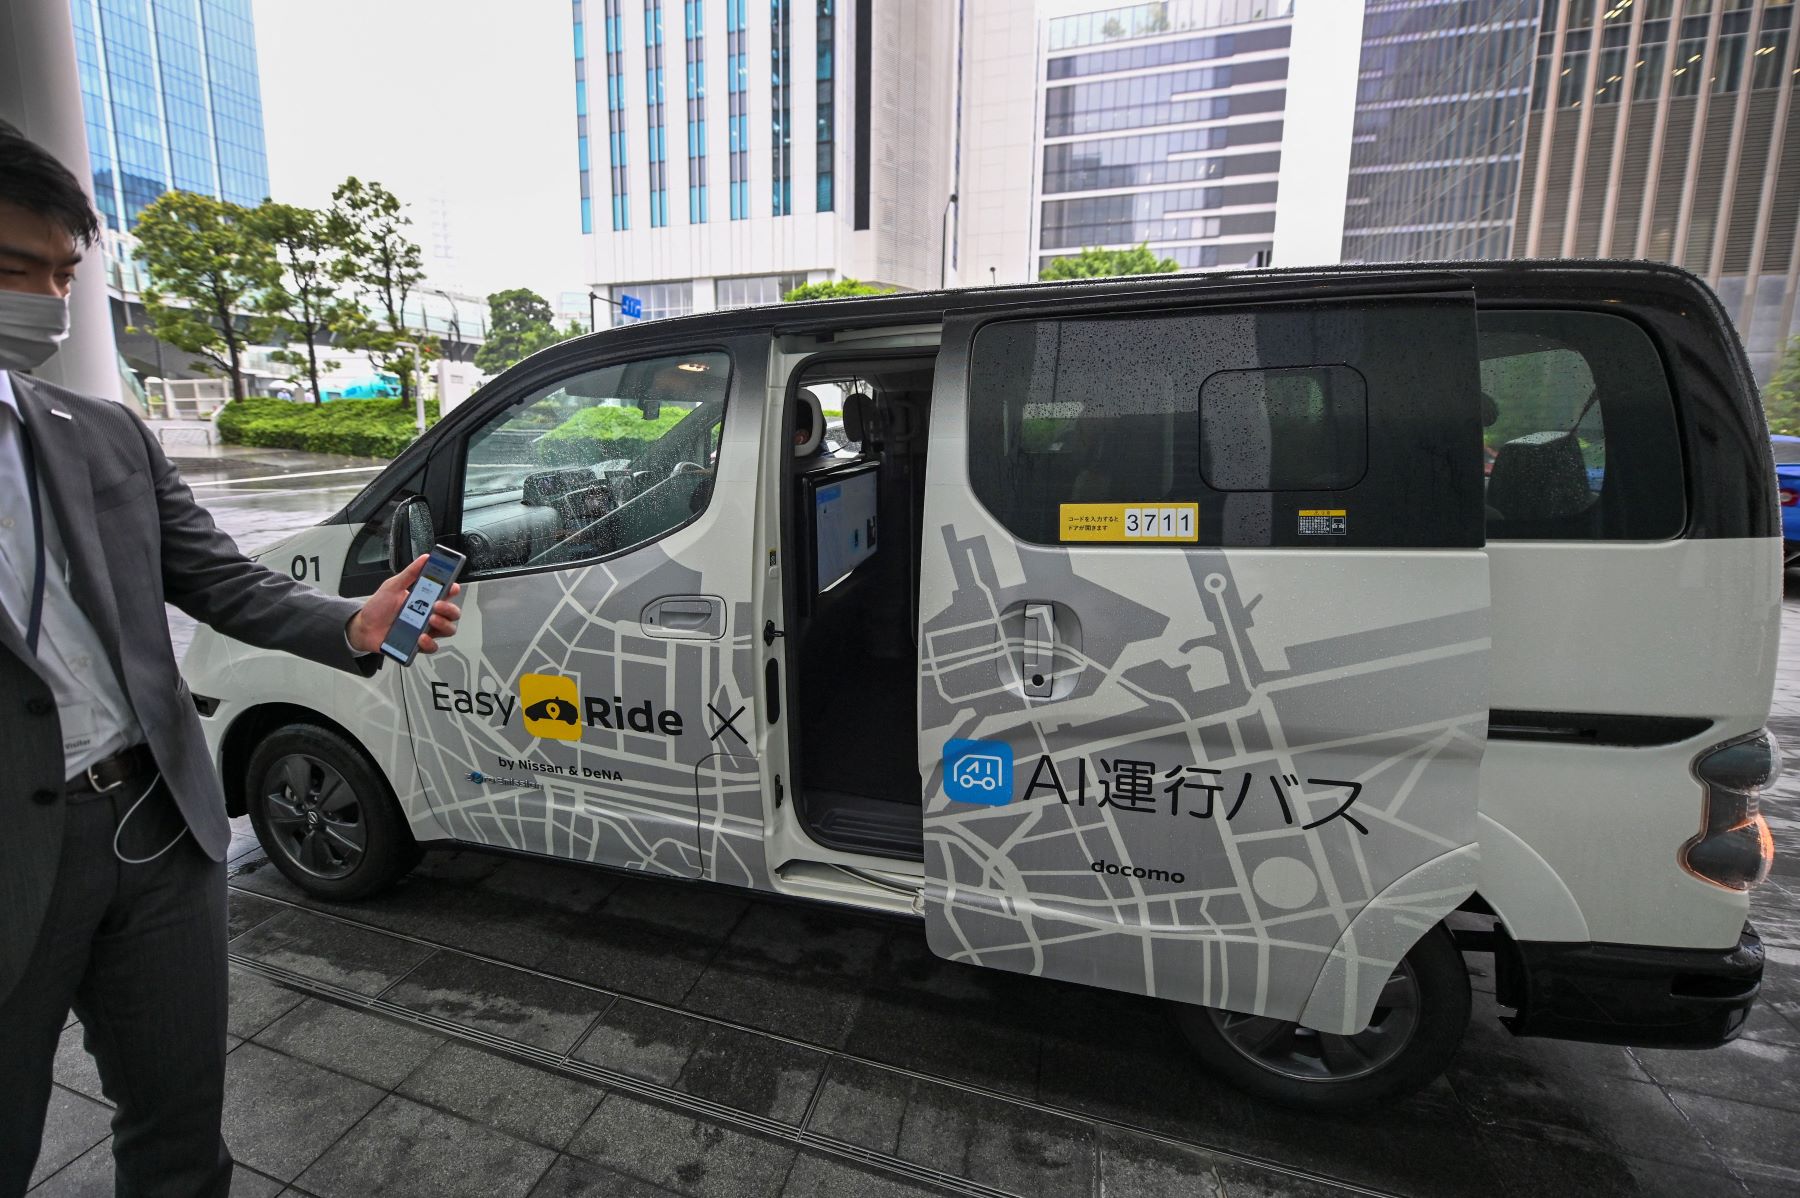 Nissan autonomous self-driving vehicle debut during press preview and operations test in Yokohama, Kanagawa Prefecture, Japan